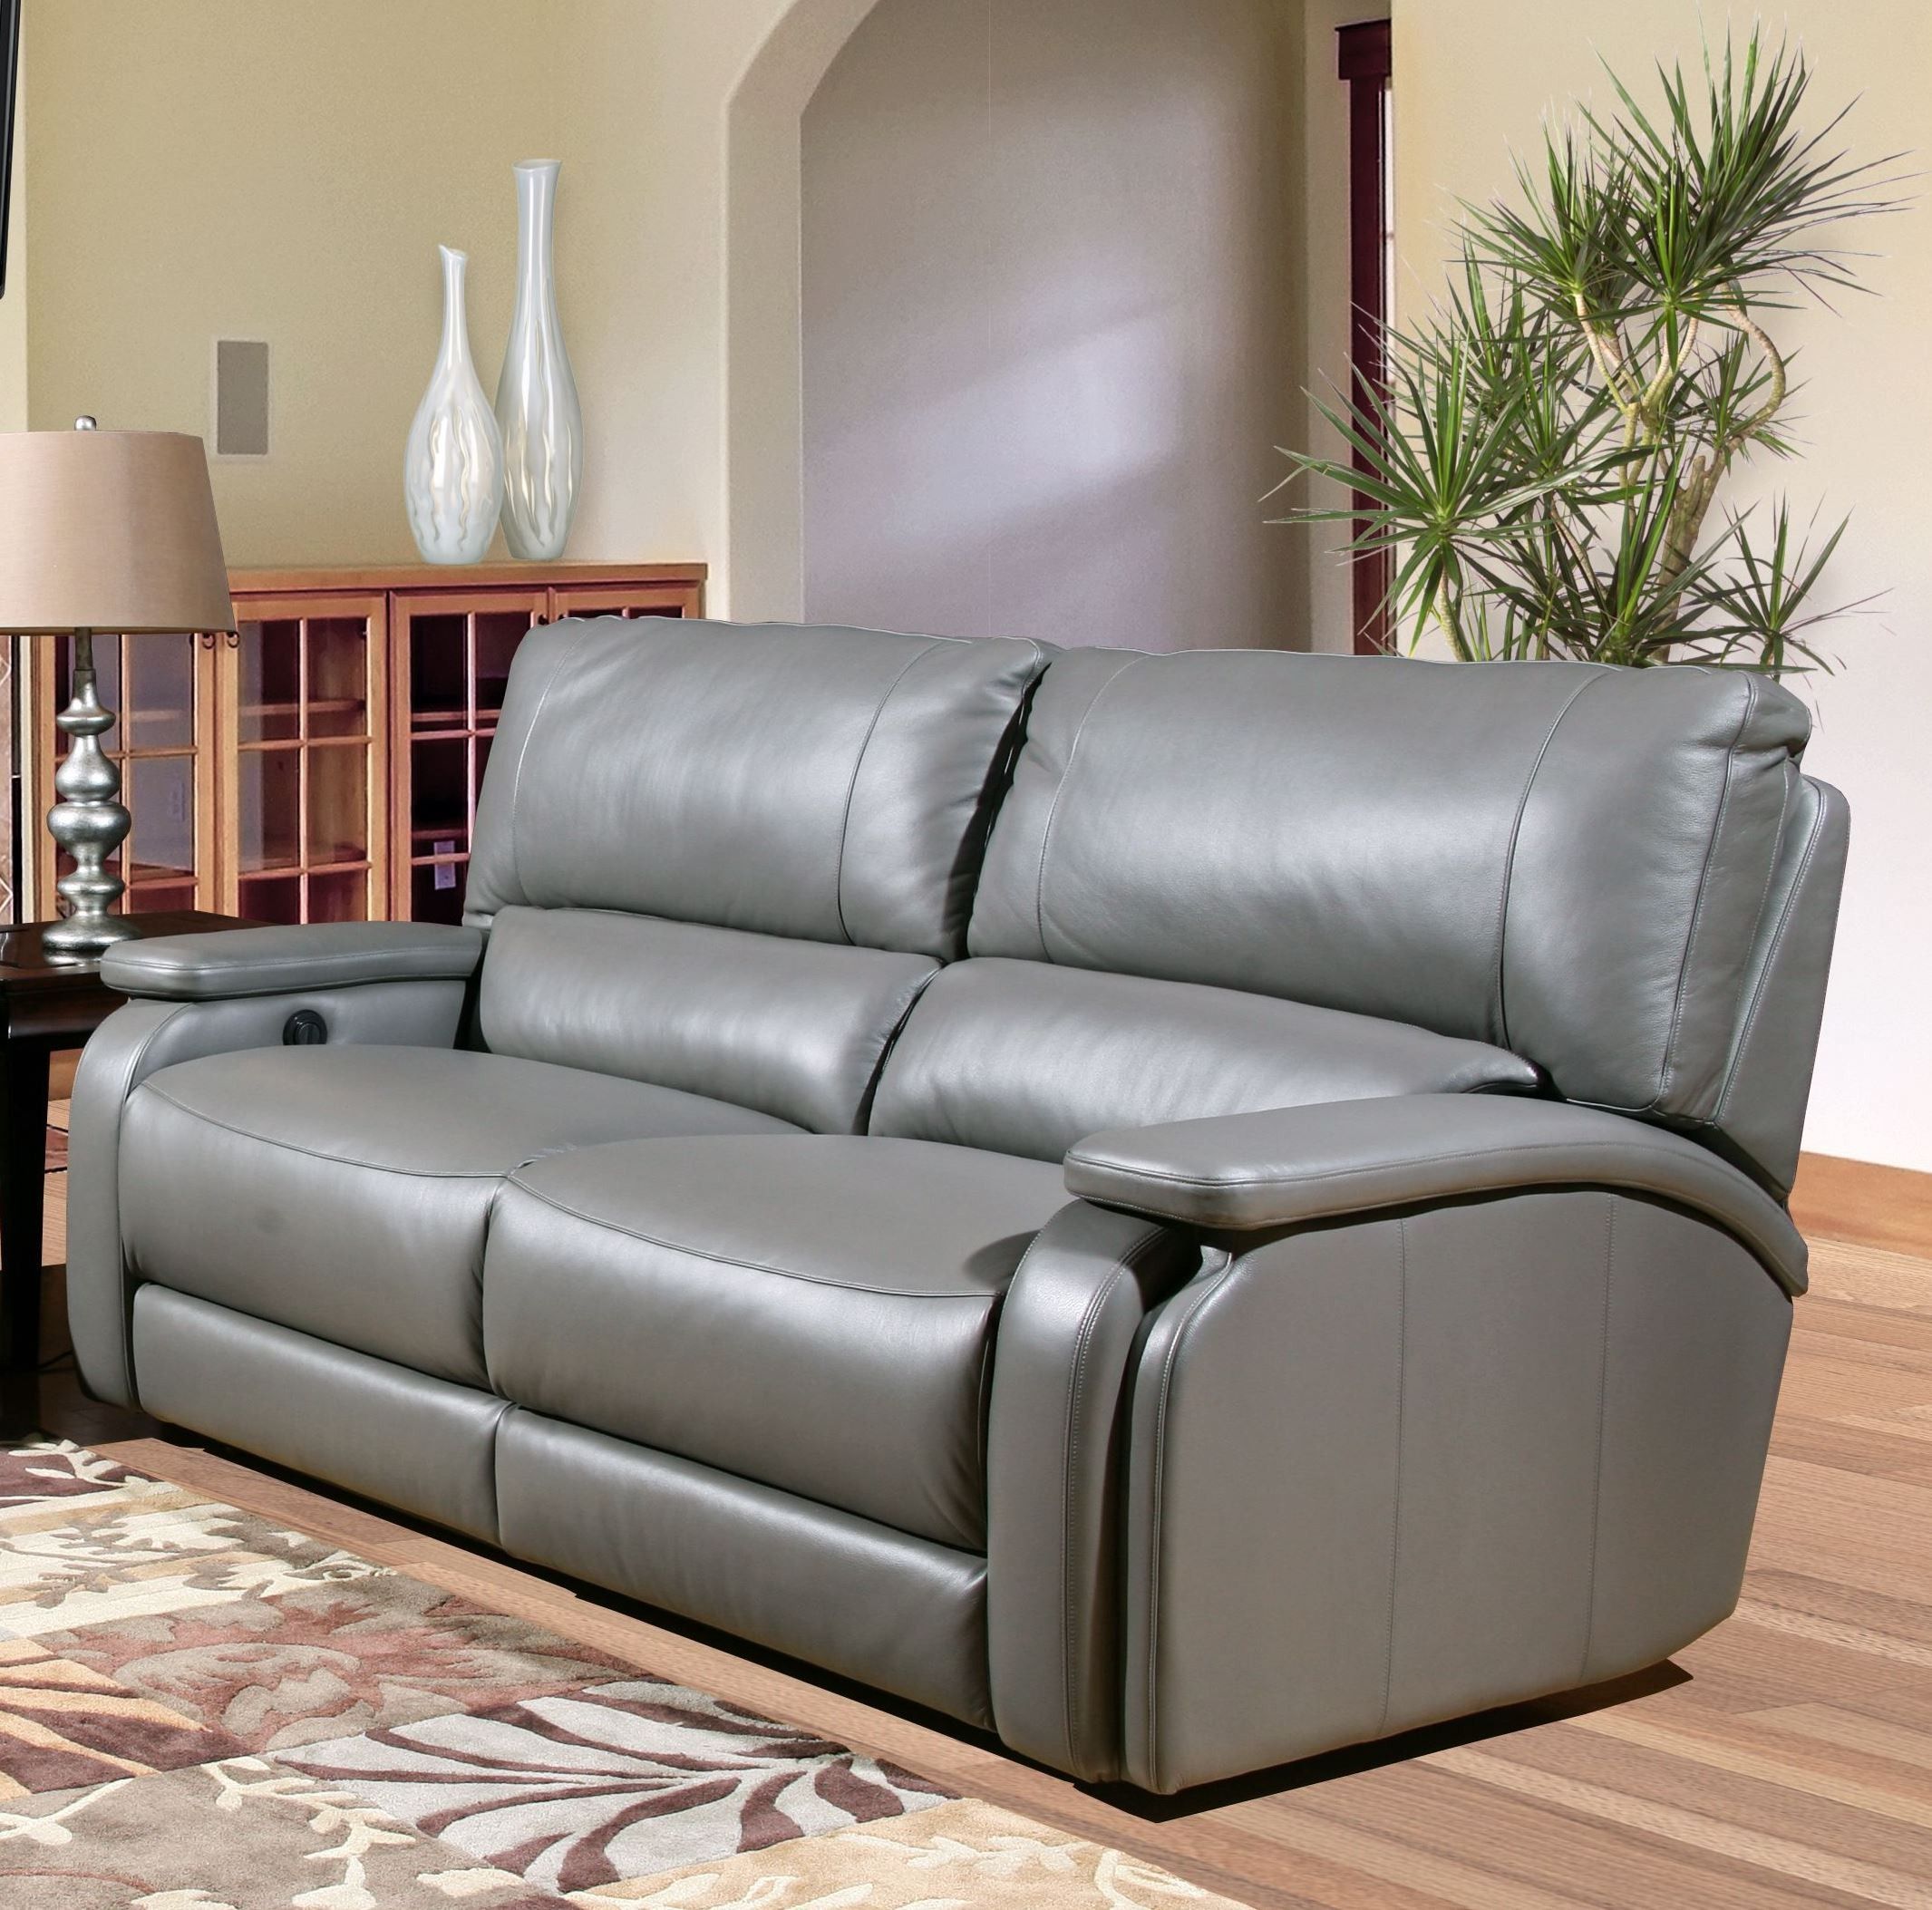 Grisham Heron Dual Power Reclining Sofa From Parker Living For Raven Power Reclining Sofas (View 4 of 15)